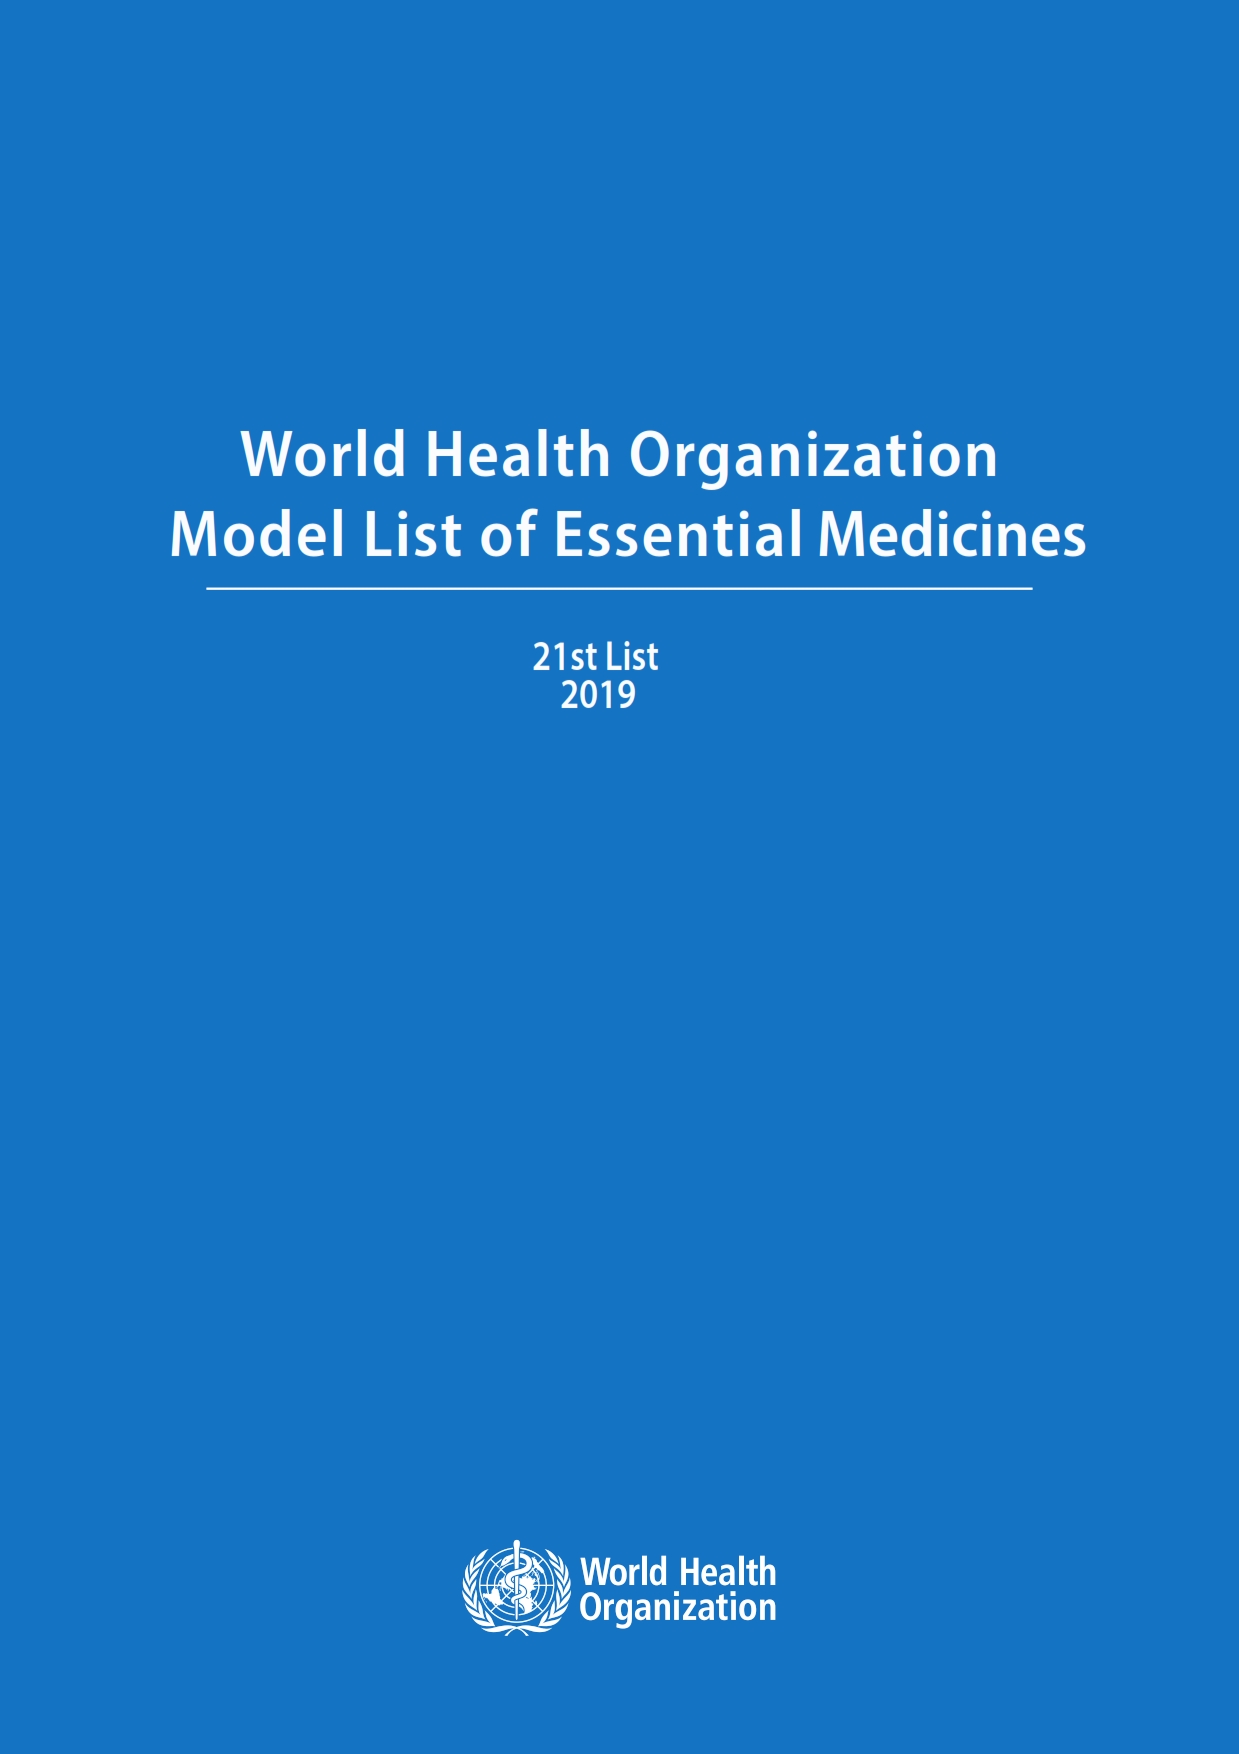 who_model_lists_of_essential_medicines